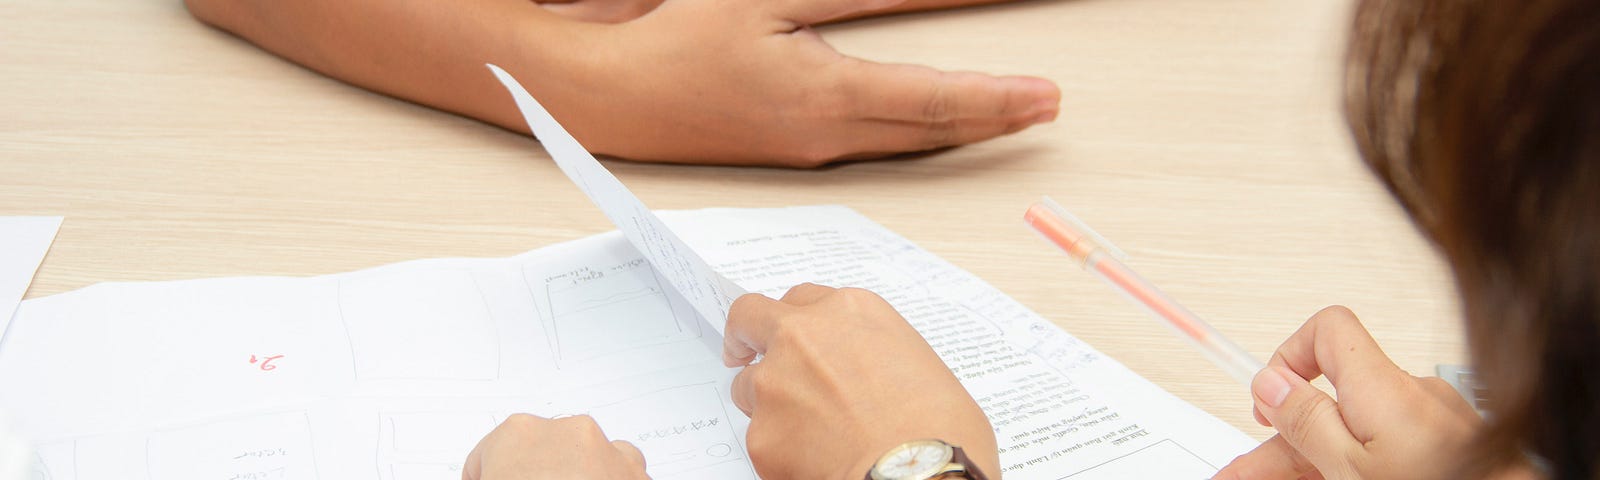 Hands on a desk with papers in a mock interview session